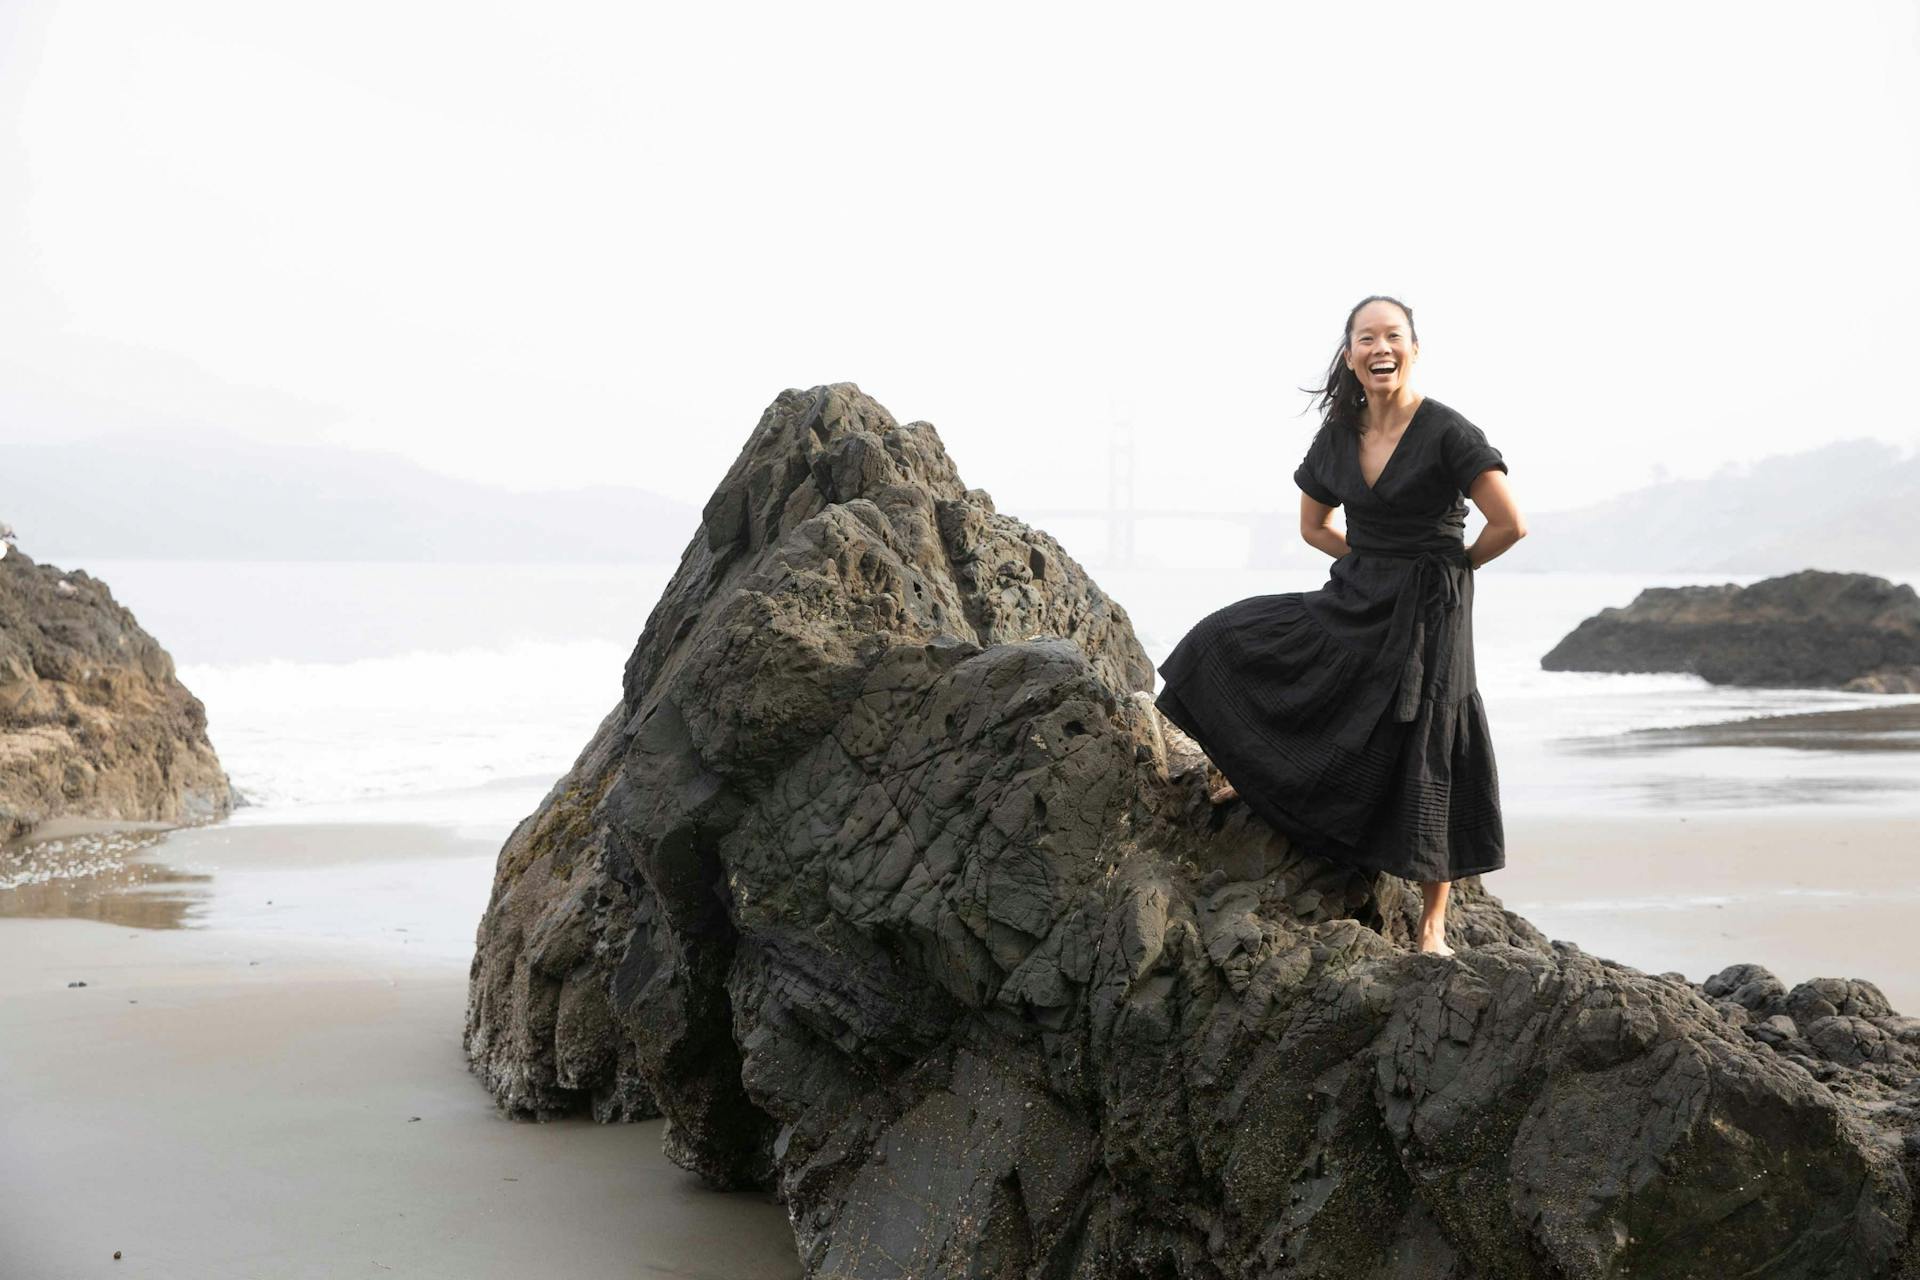 Bonnie Tsui wears a dark outfit and sits on a rock